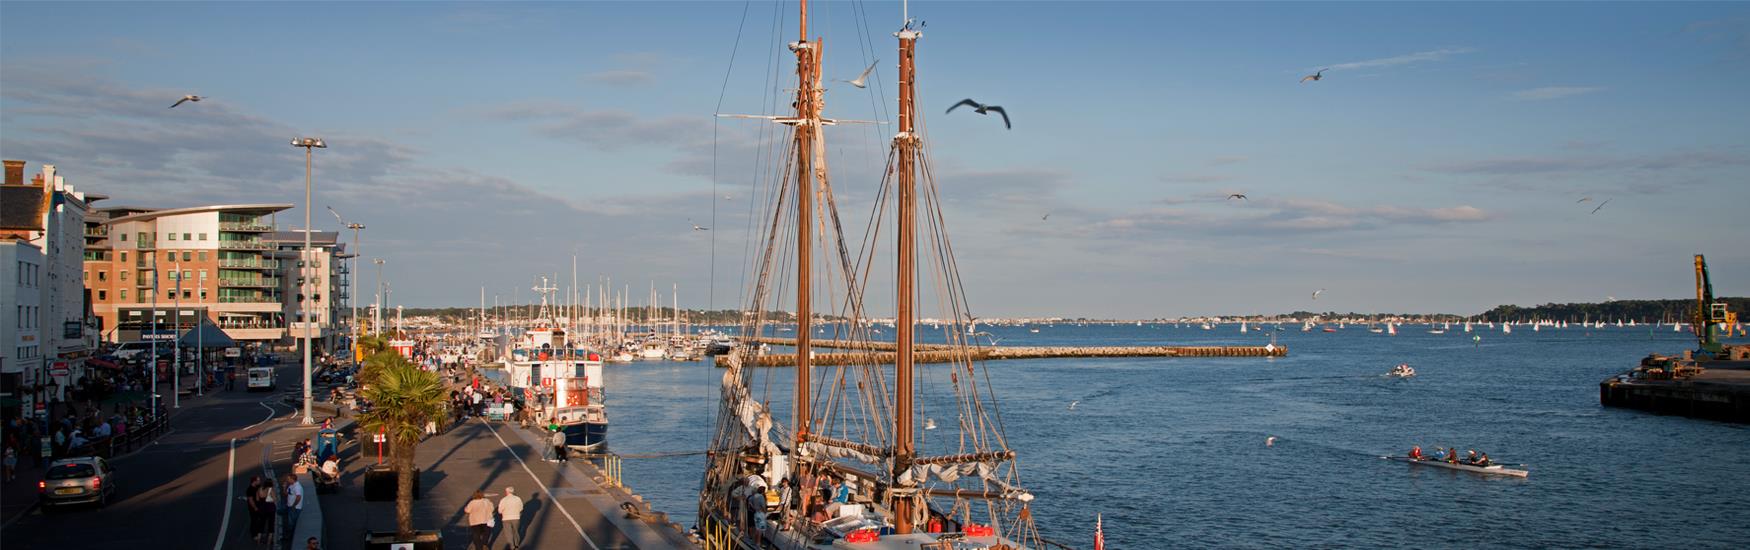 Visit the neighbouring town of Poole © Poole Tourism